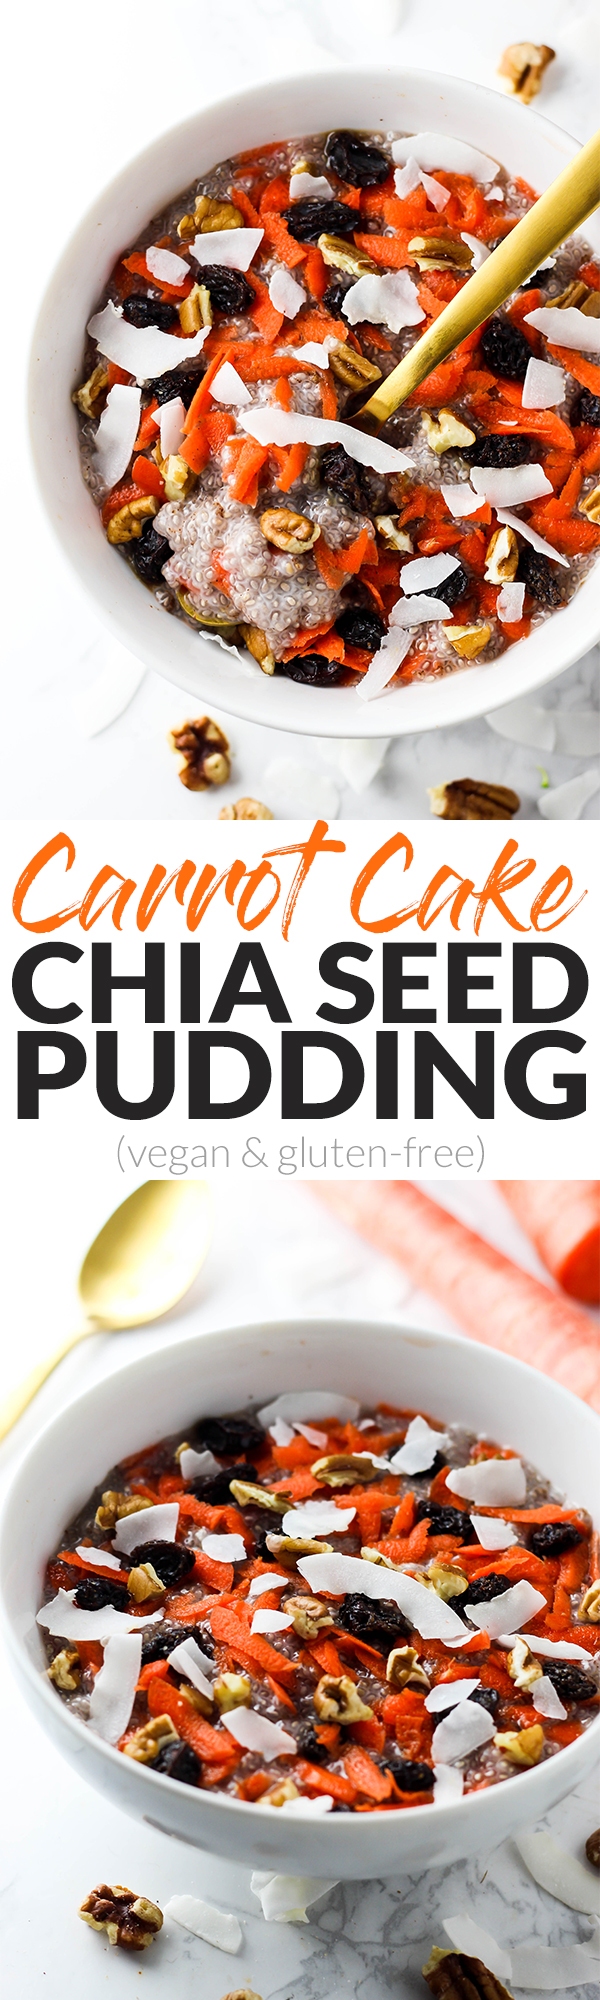 Cake for breakfast? Of course! This Carrot Cake Chia Pudding is a decadent, healthy breakfast that will keep you satisfied all morning. Vegan & gluten-free!